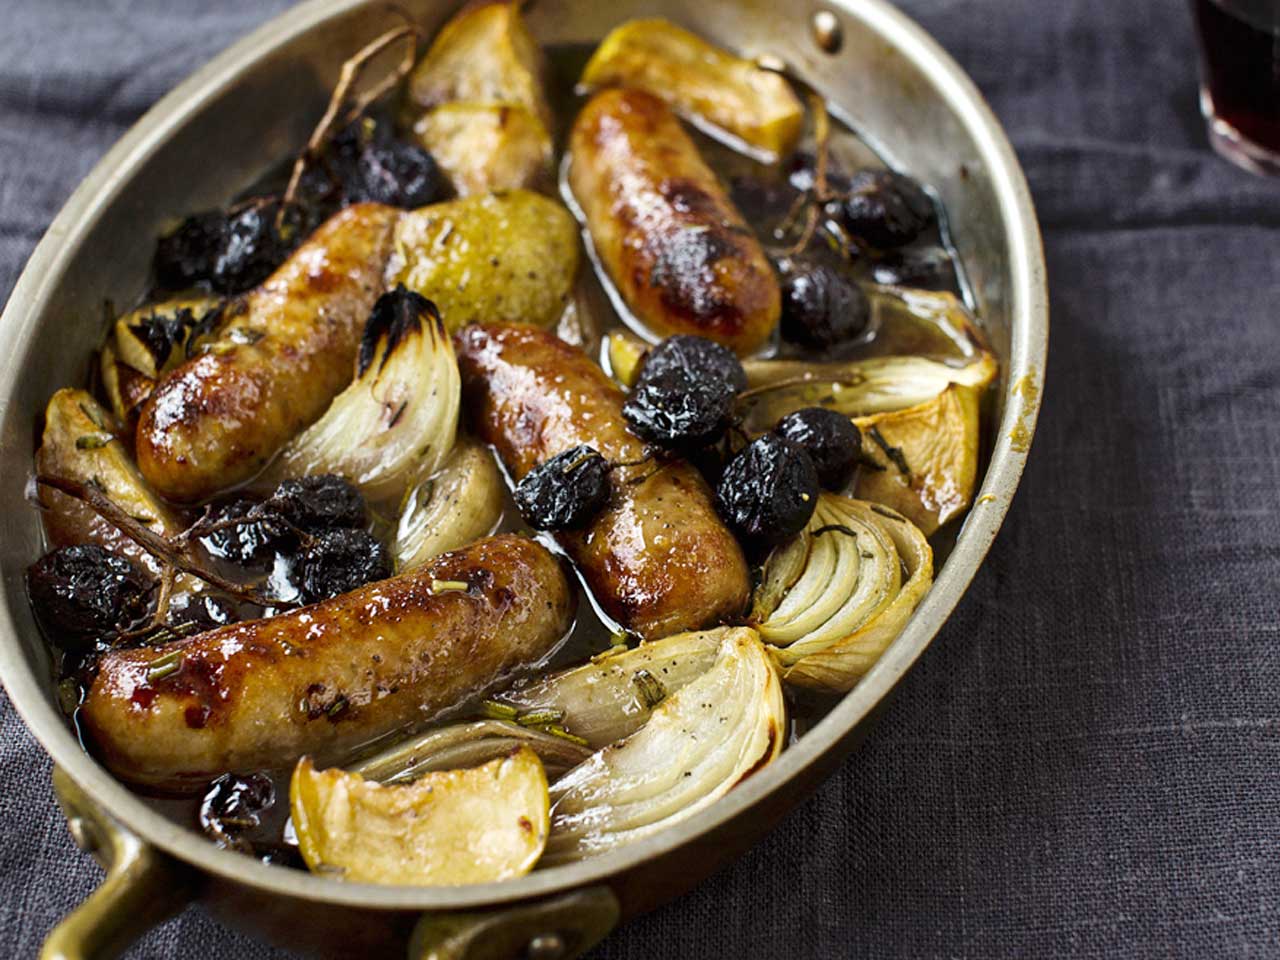 Sausages roasted with apples, grapes and sherry